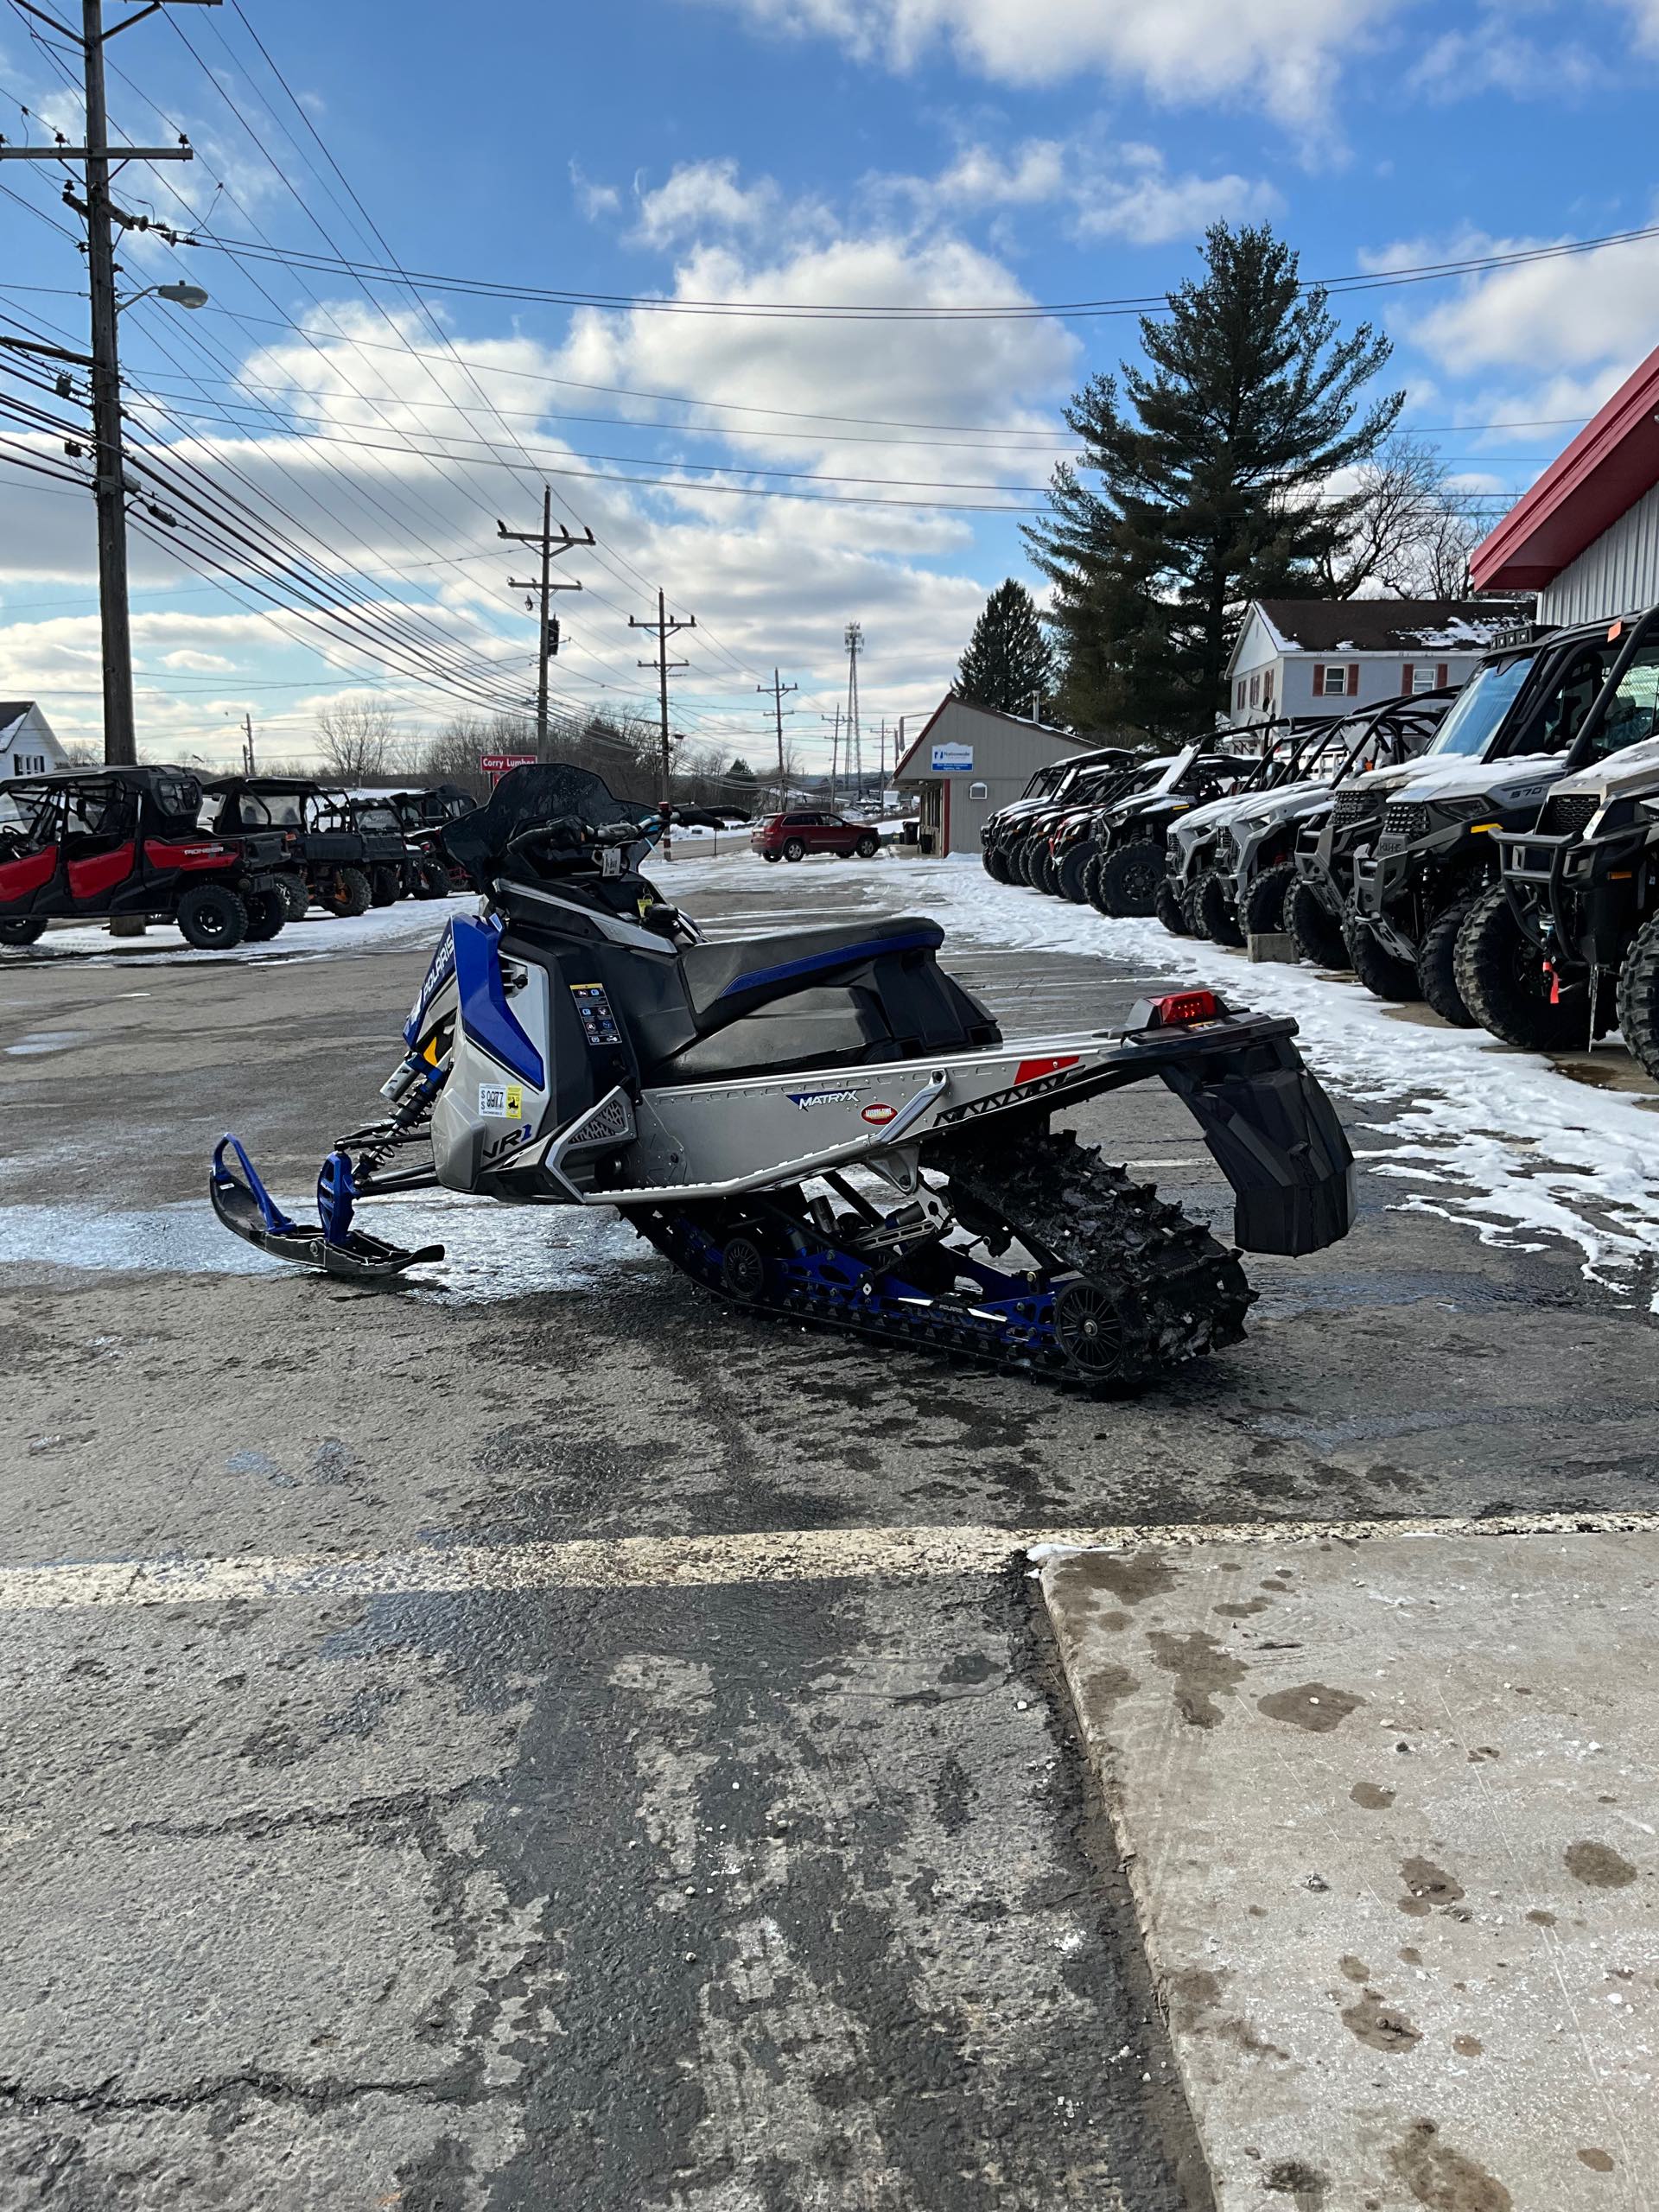 2021 Polaris INDY VR1 137 650 at Leisure Time Powersports of Corry